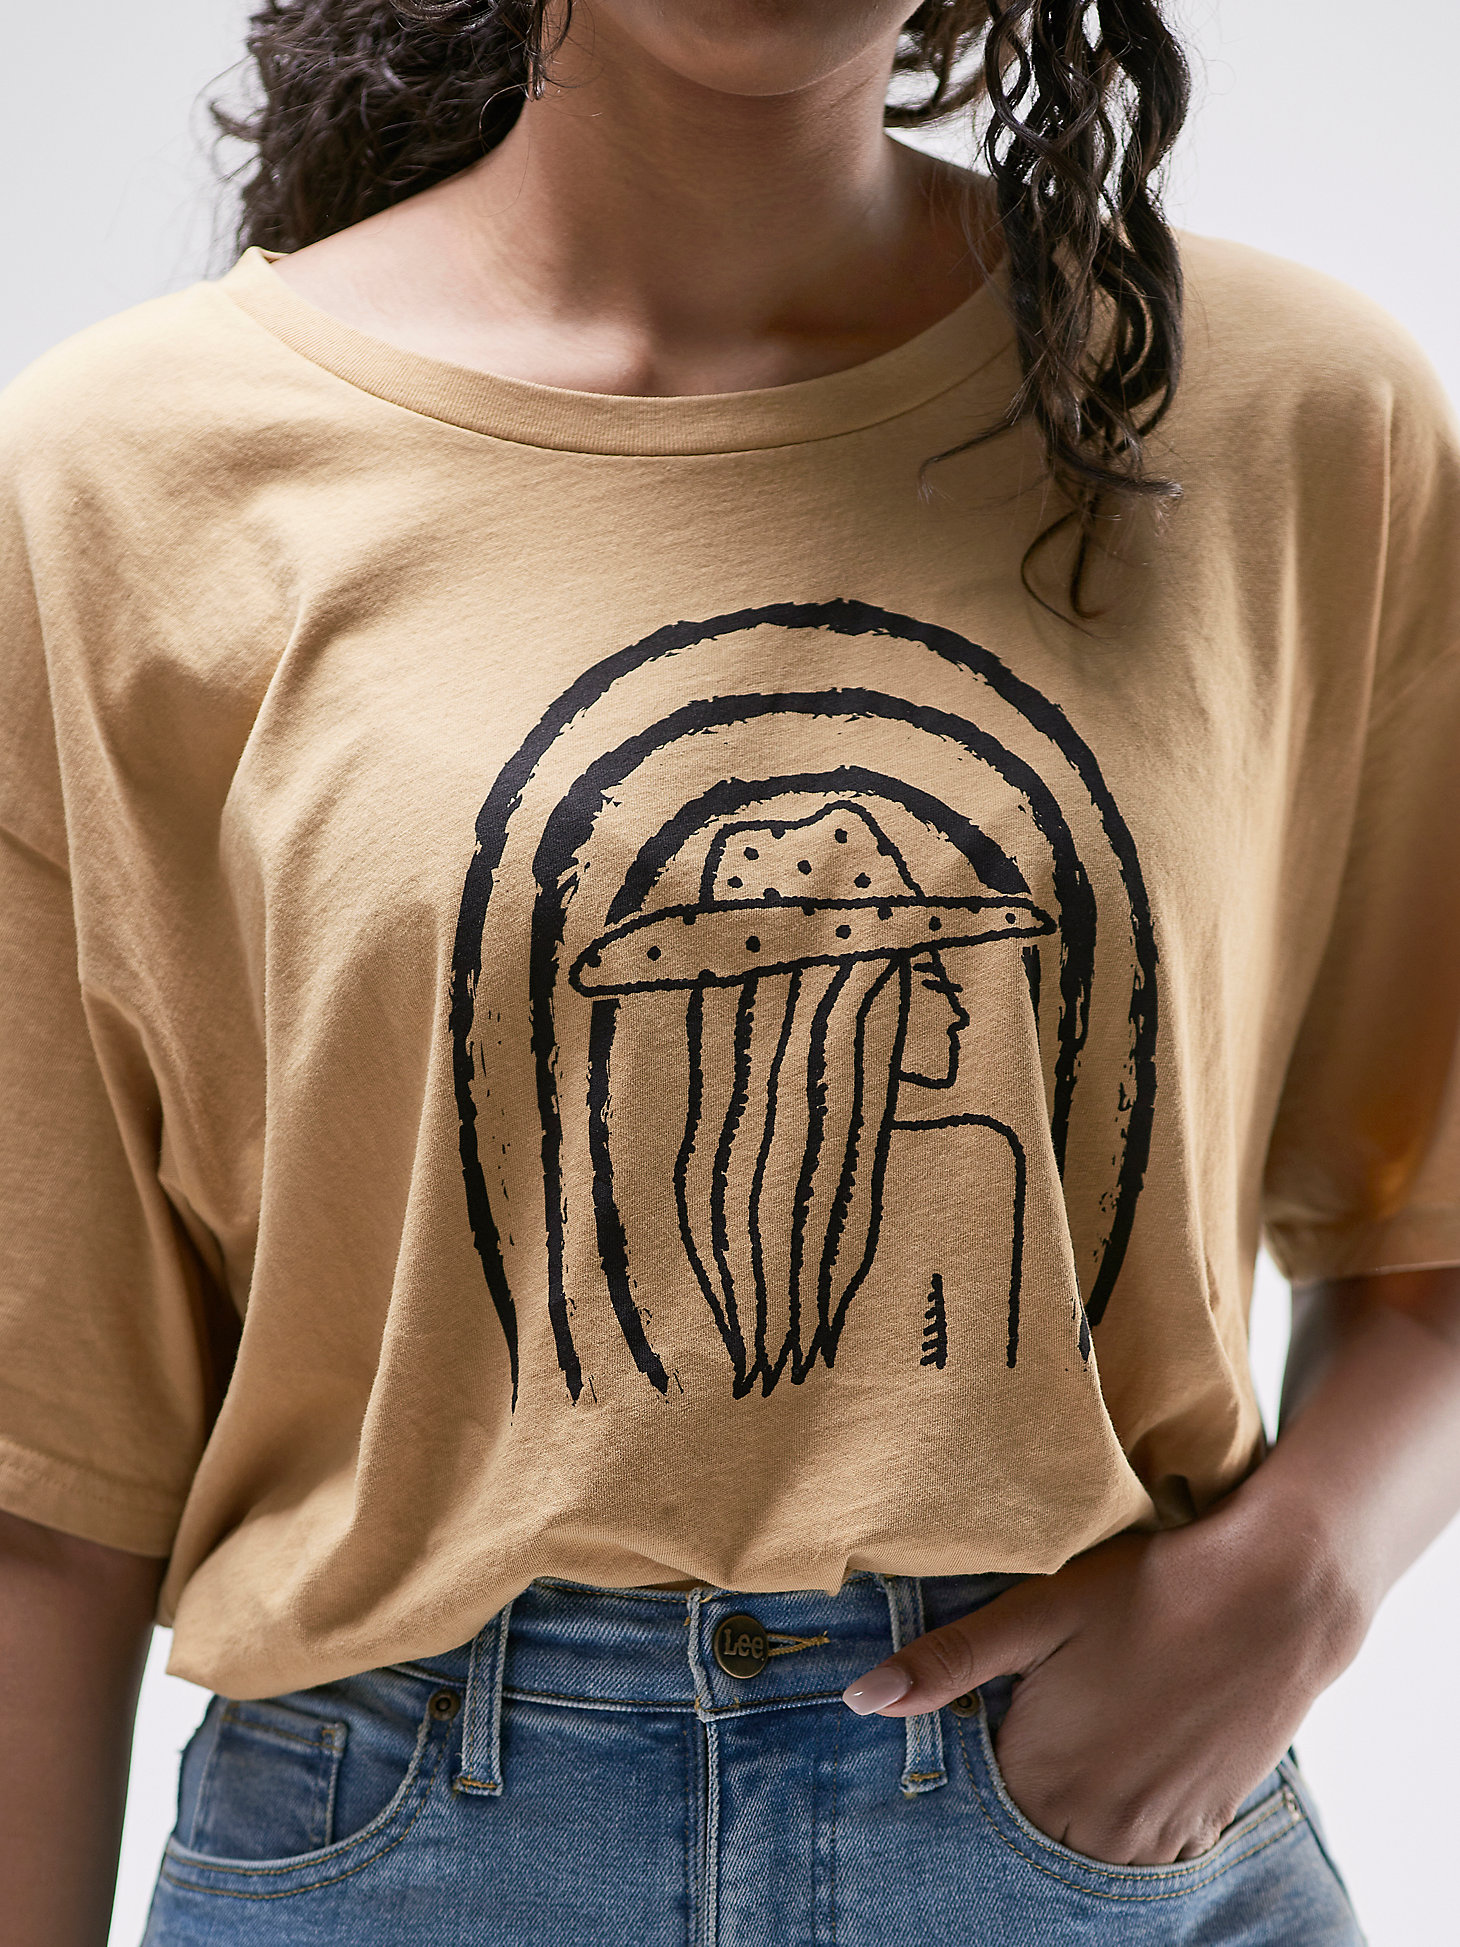 Women's Vintage Modern Oversized Graphic Tee in Pale Gold alternative view 2